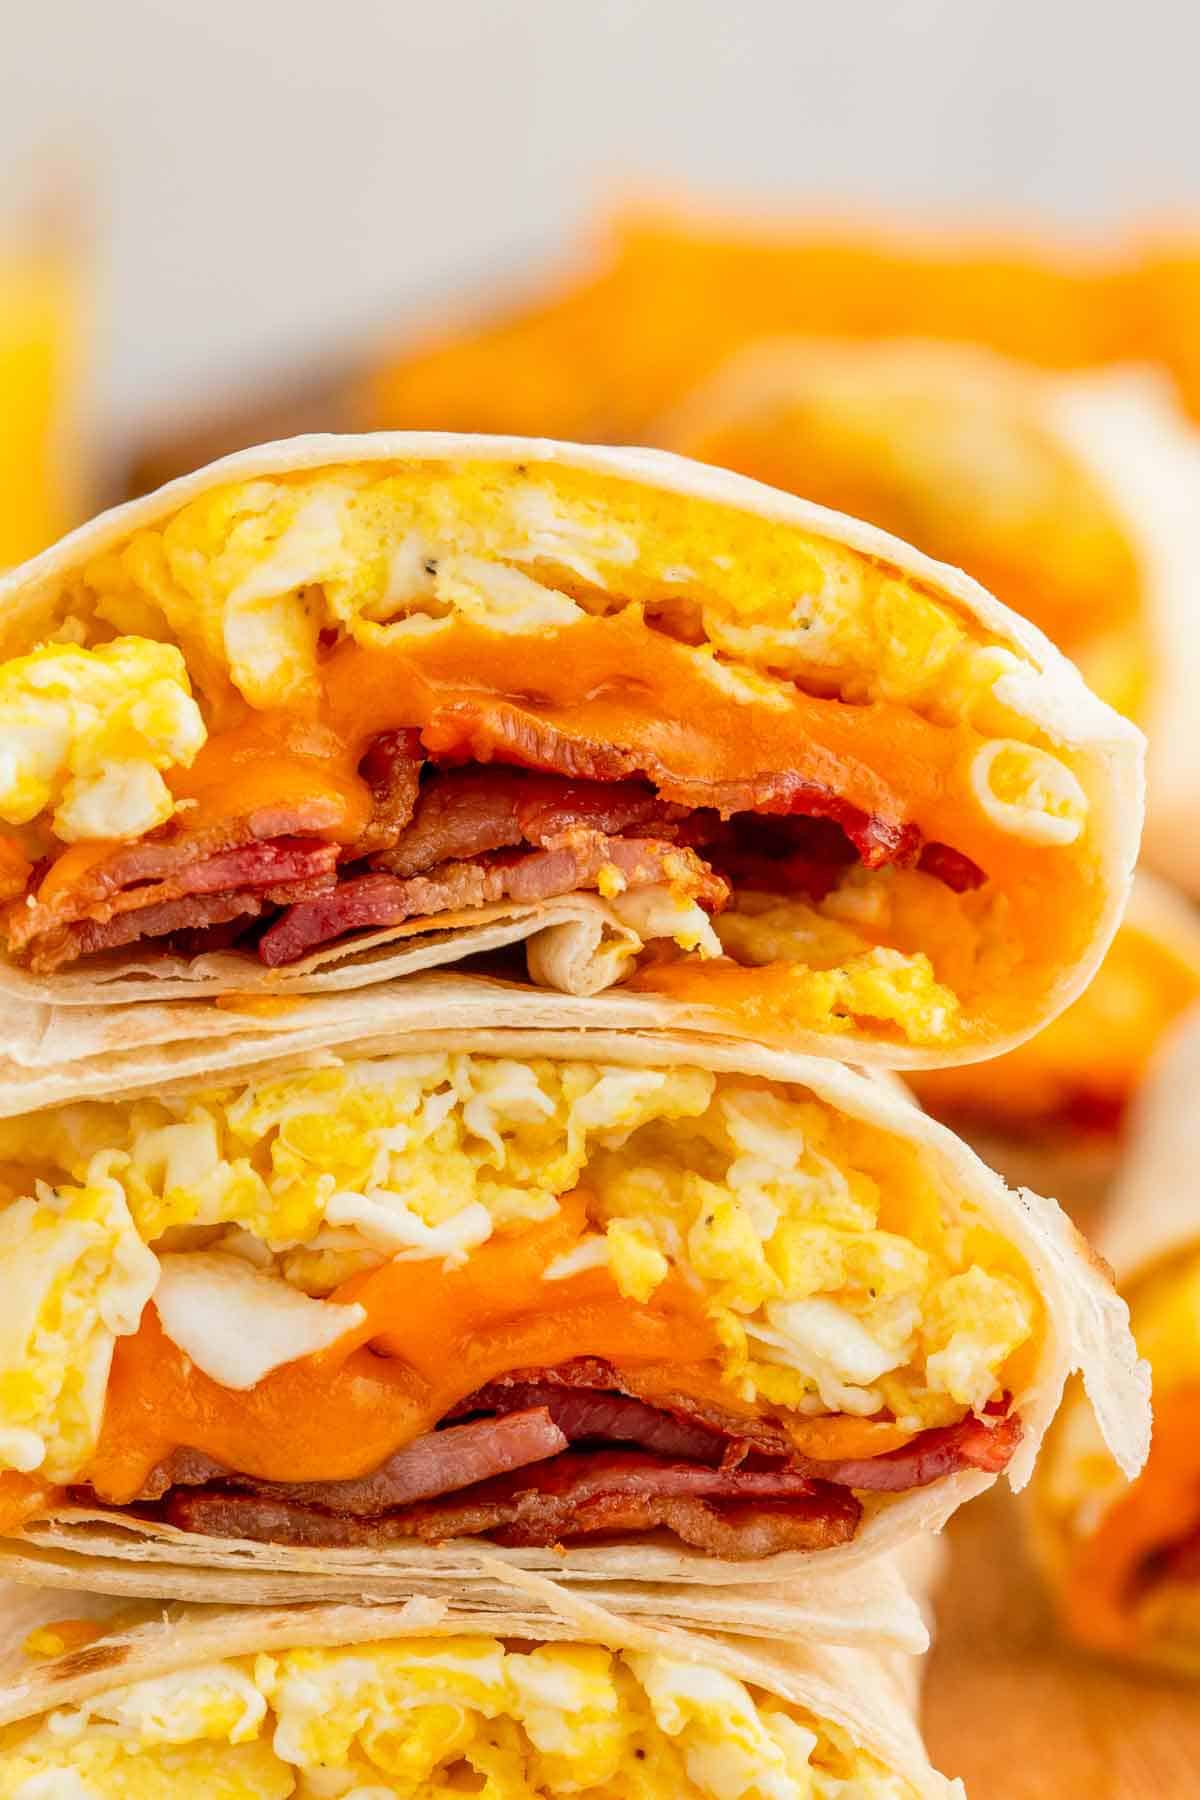 Bacon Egg and Cheese Breakfast Burrito Ingredients